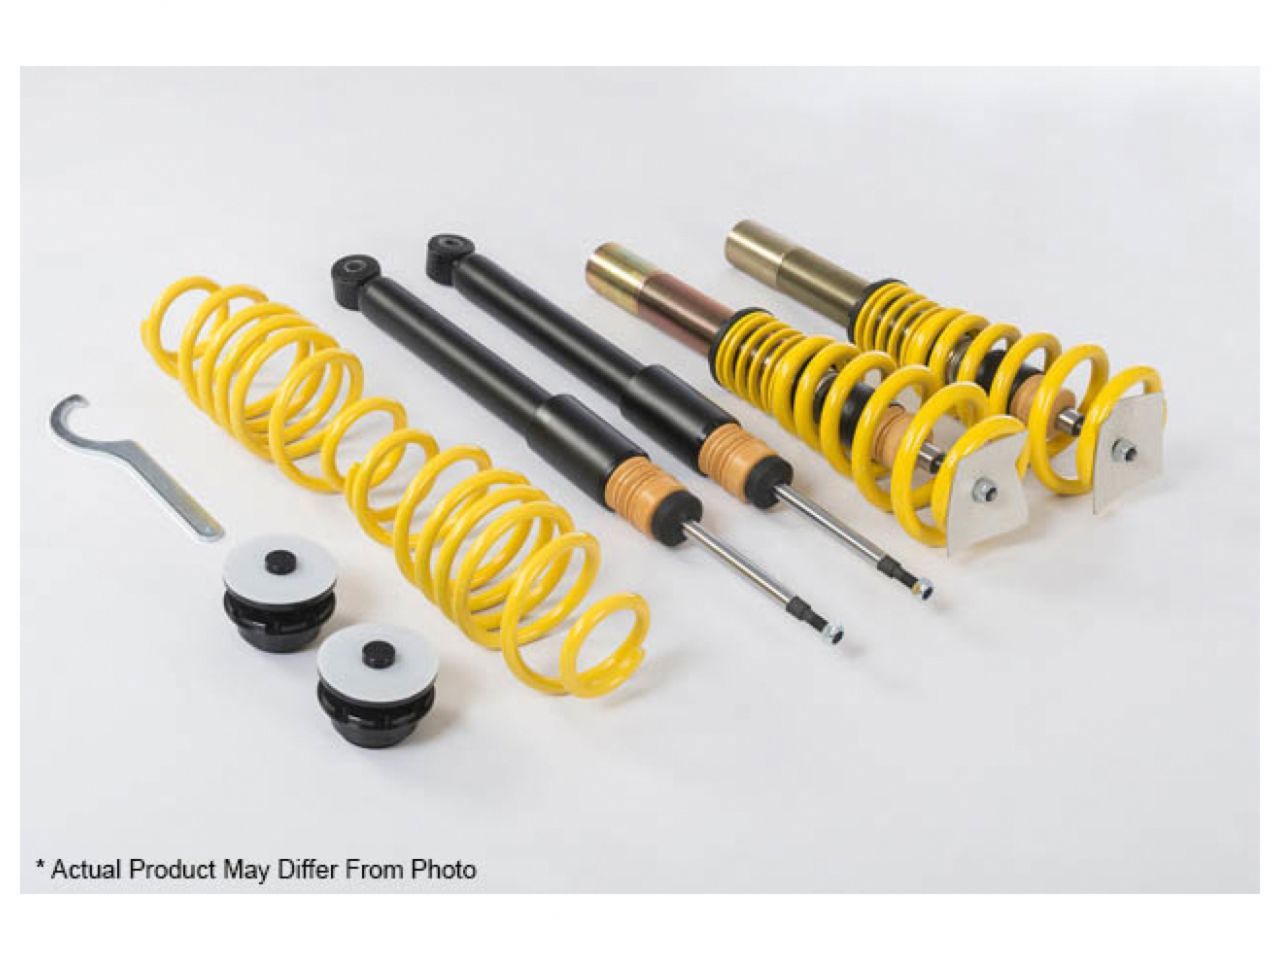 ST Suspensions Coilover Kits 13250024 Item Image